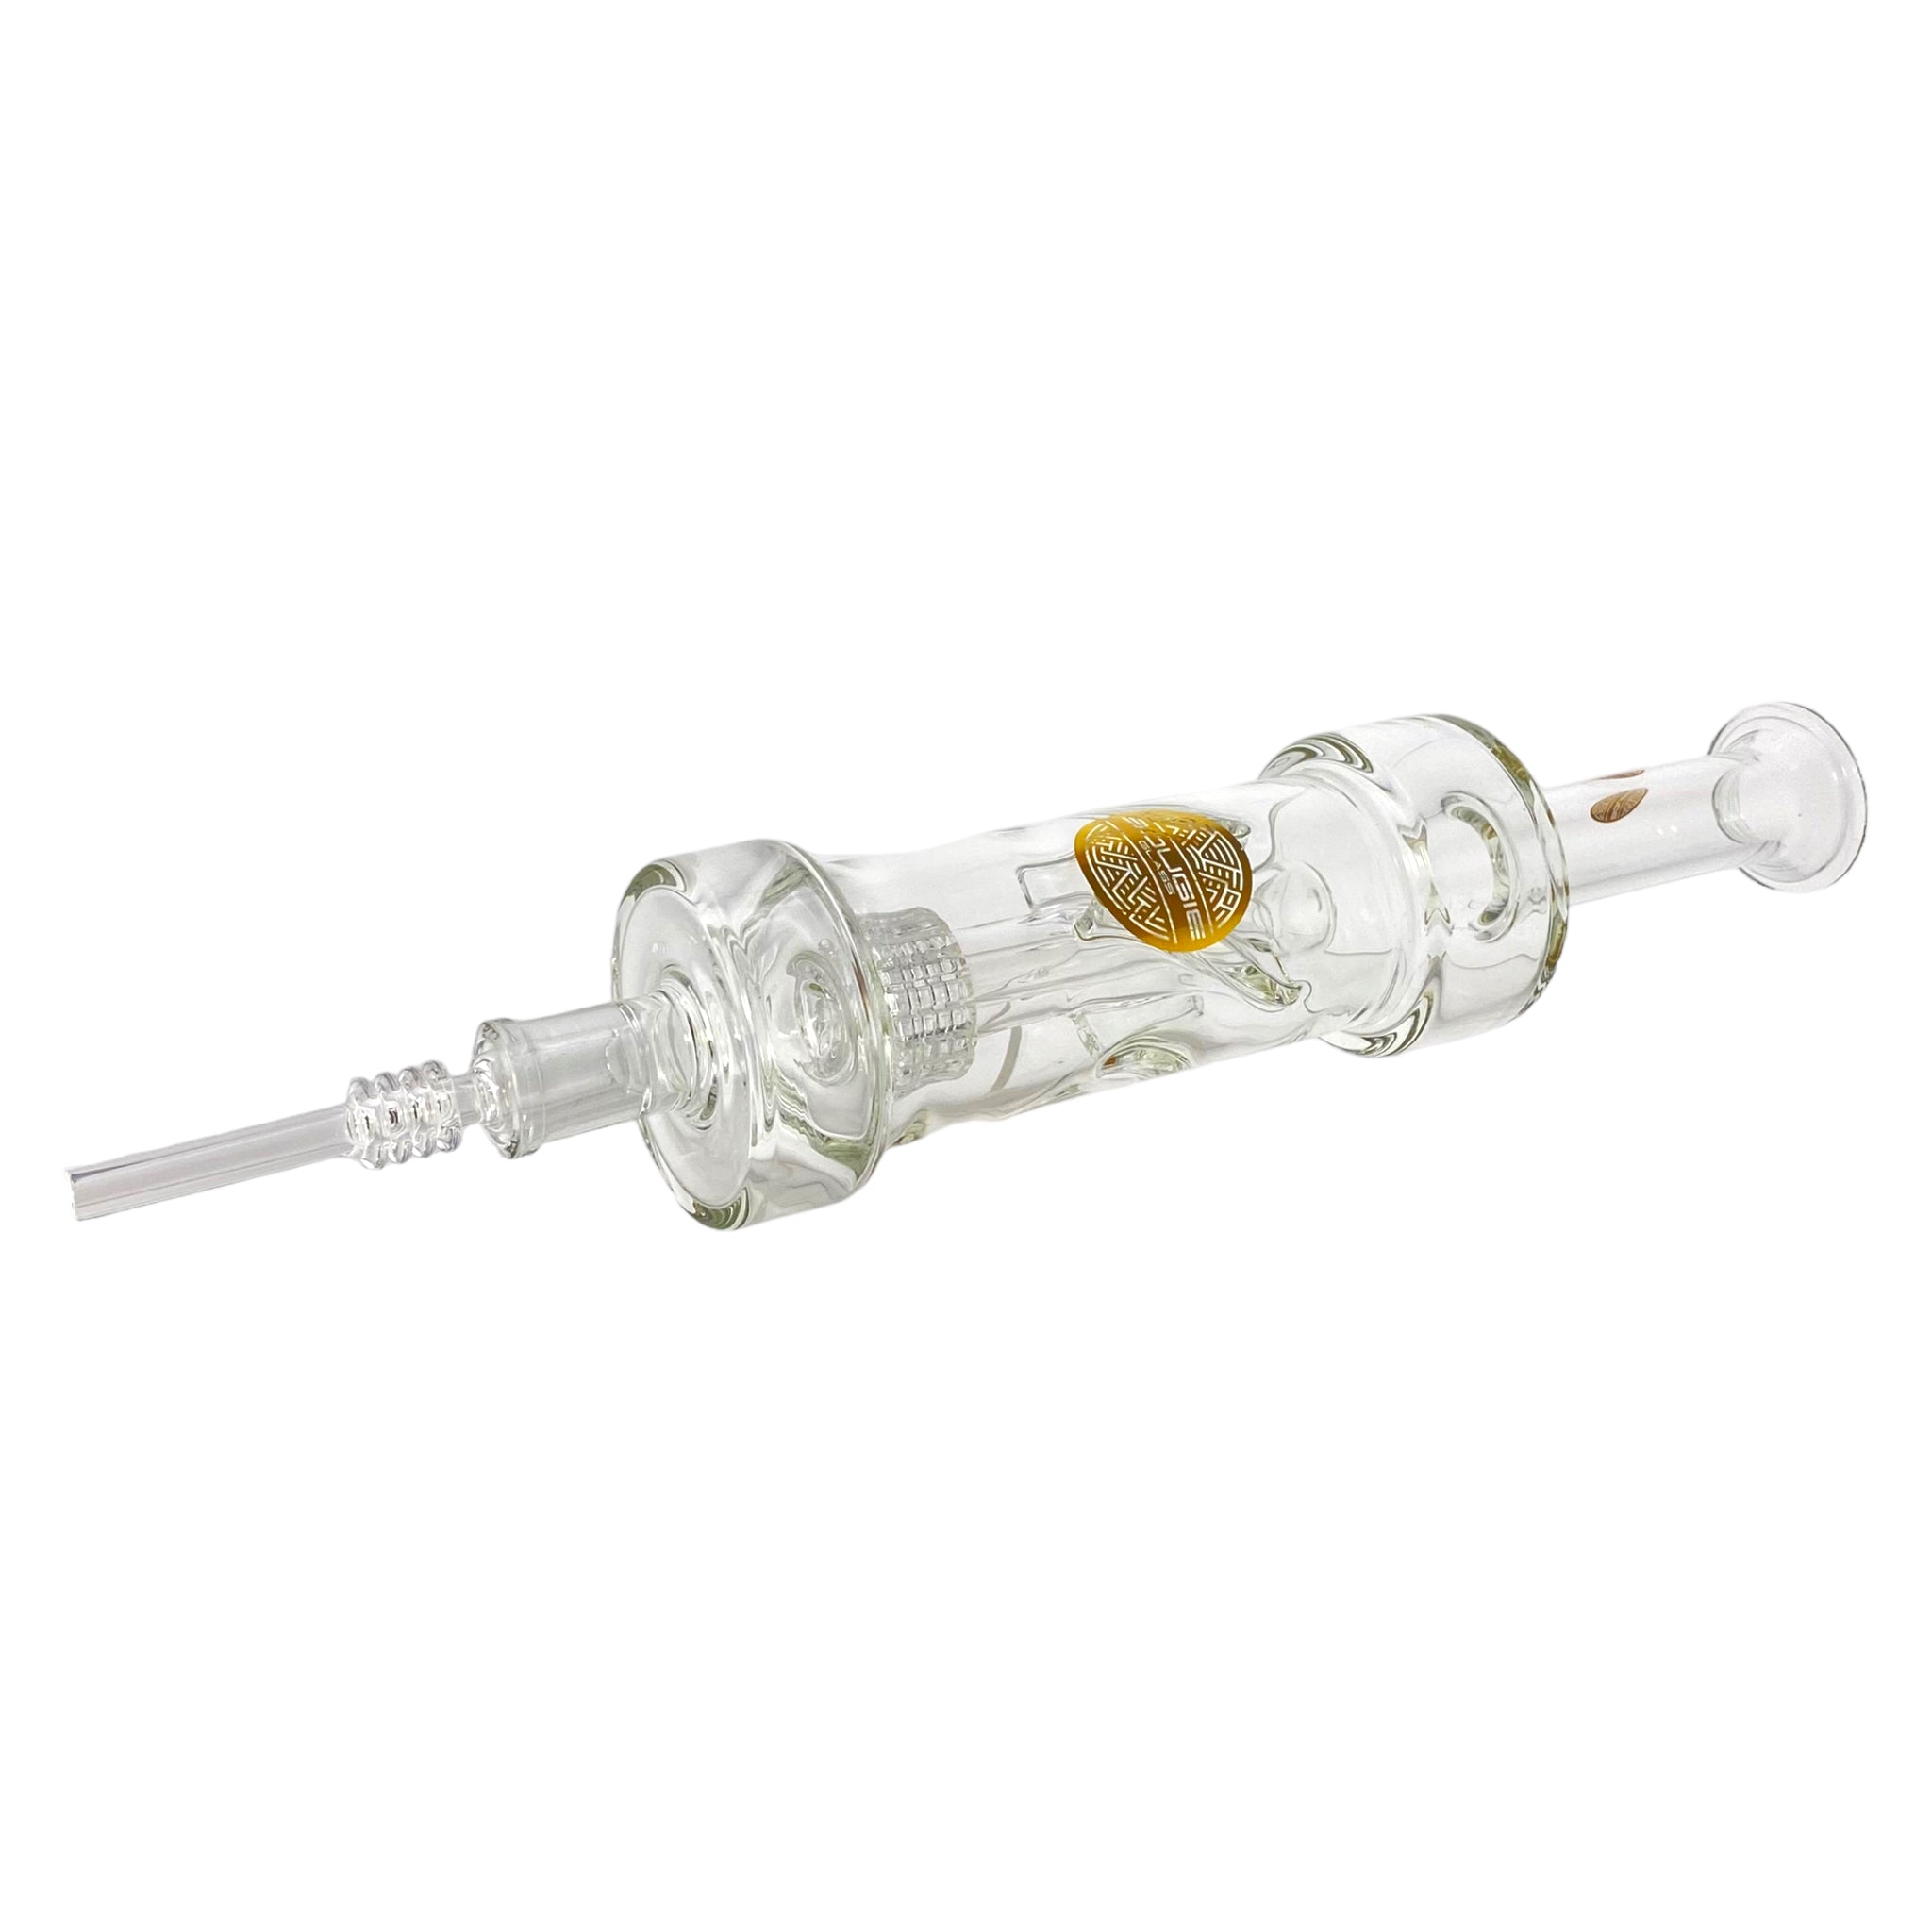 Glass Nectar Collector, glass dab straw